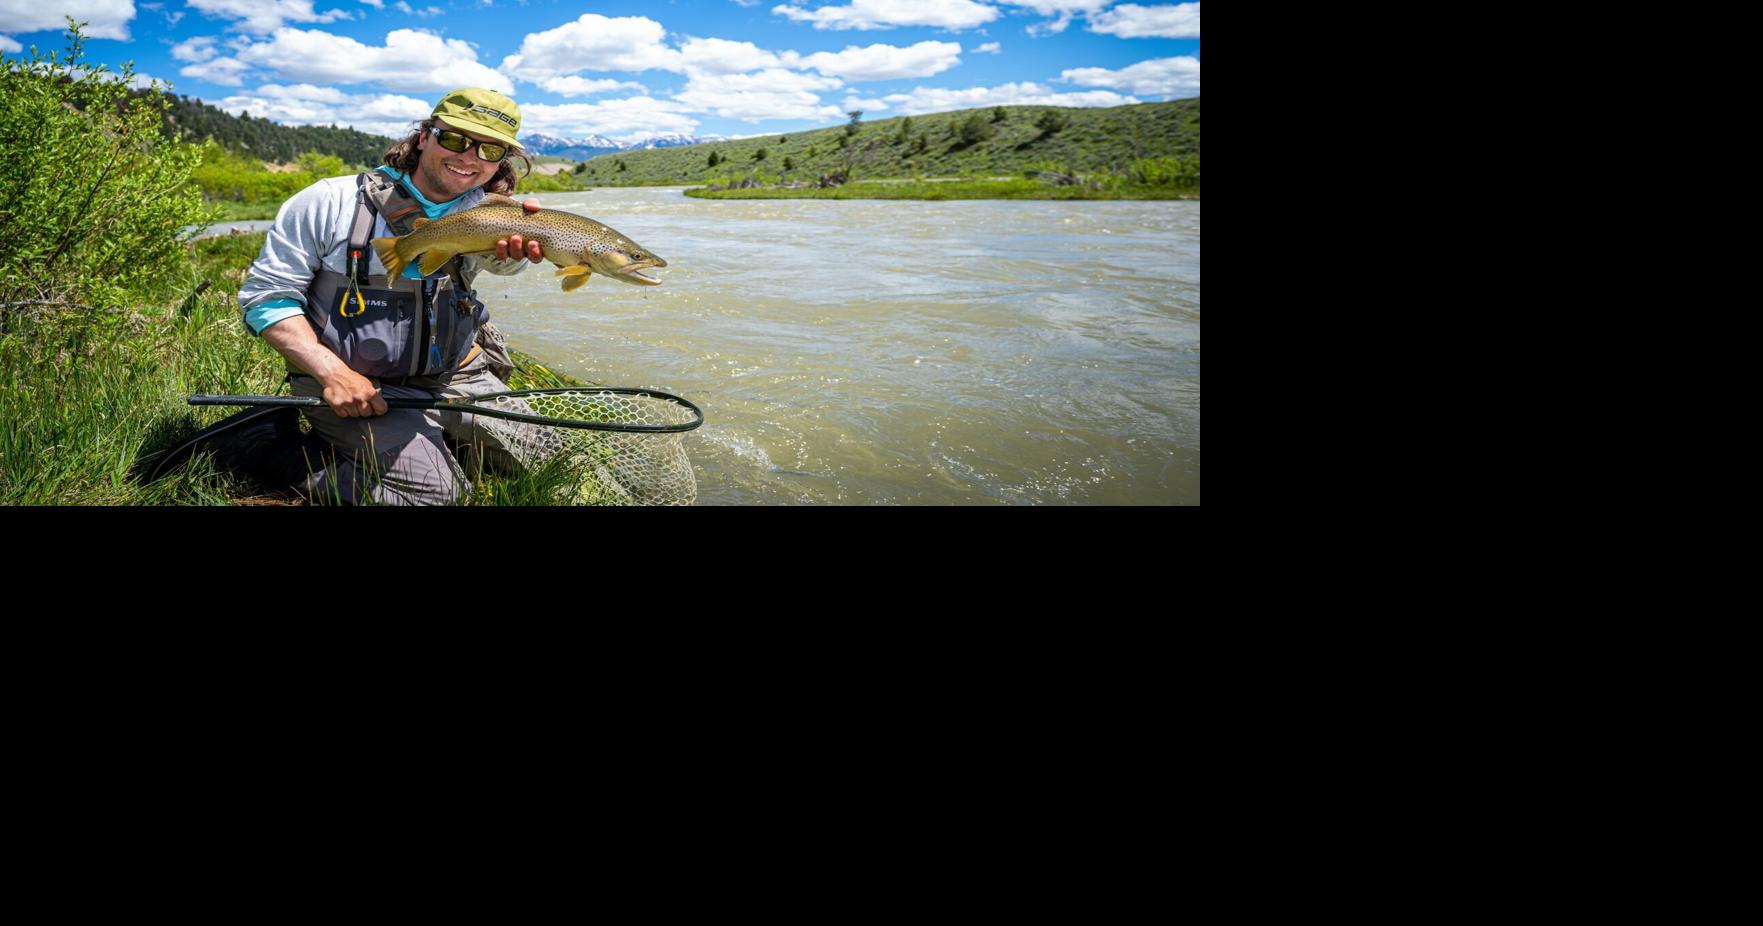 Fly fishing enthusiast finds career as guide in Montana, Local News